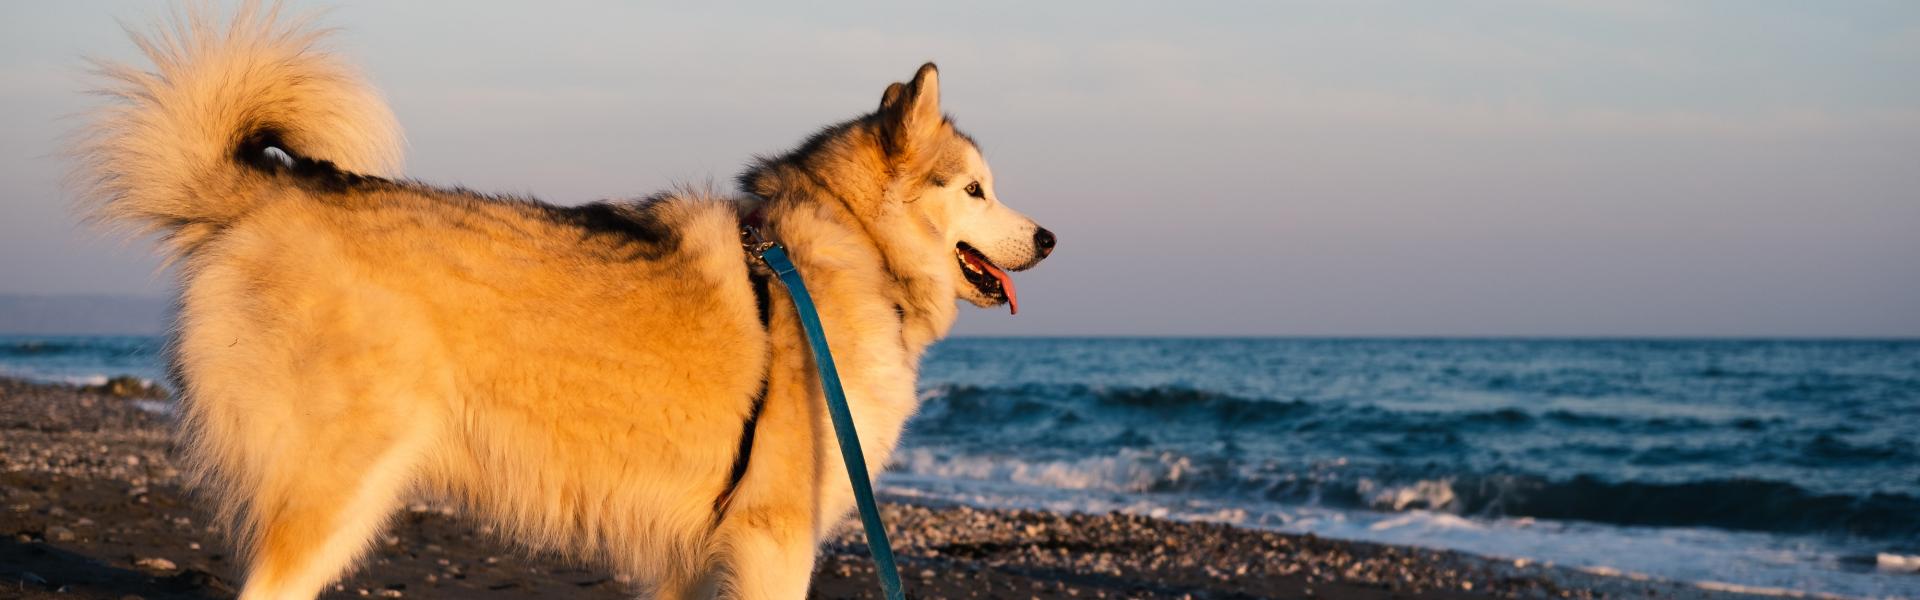 white and brown dog on beach during daytime